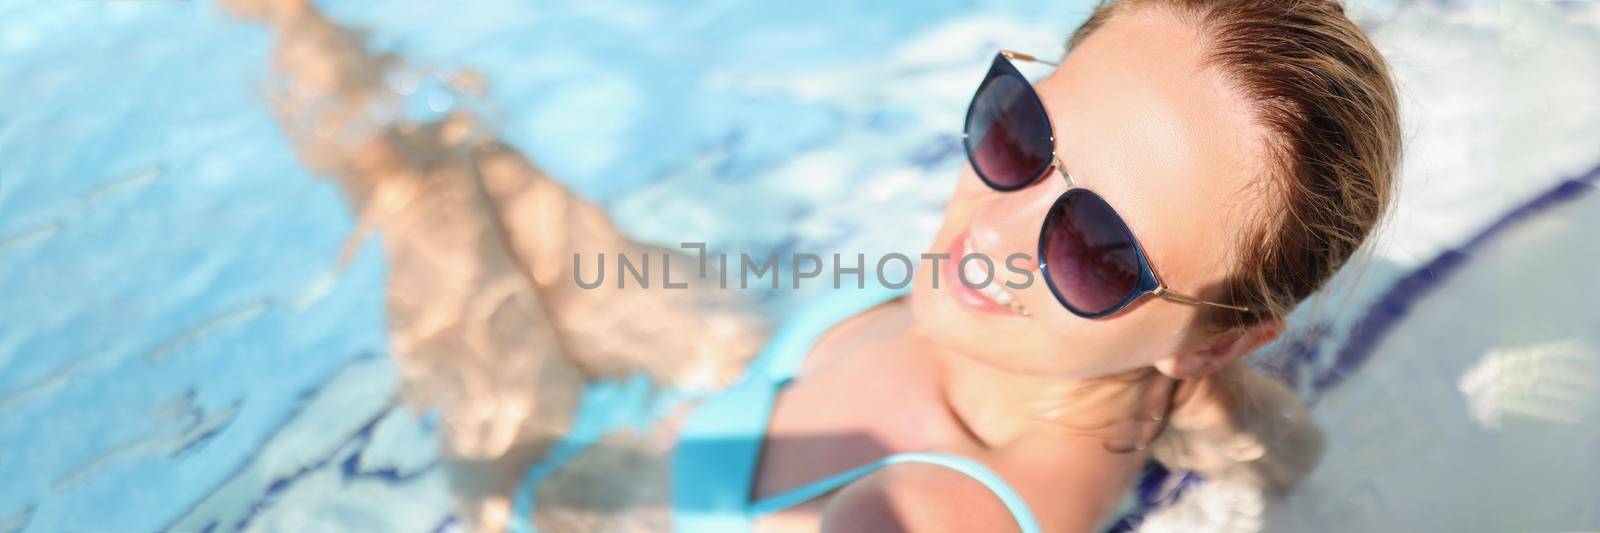 Portrait of carefree young woman relaxing in luxury swimming pool, smiling female wear glasses, blue swimsuit, clean water. Holiday, summer, resort, chilling, vacation concept